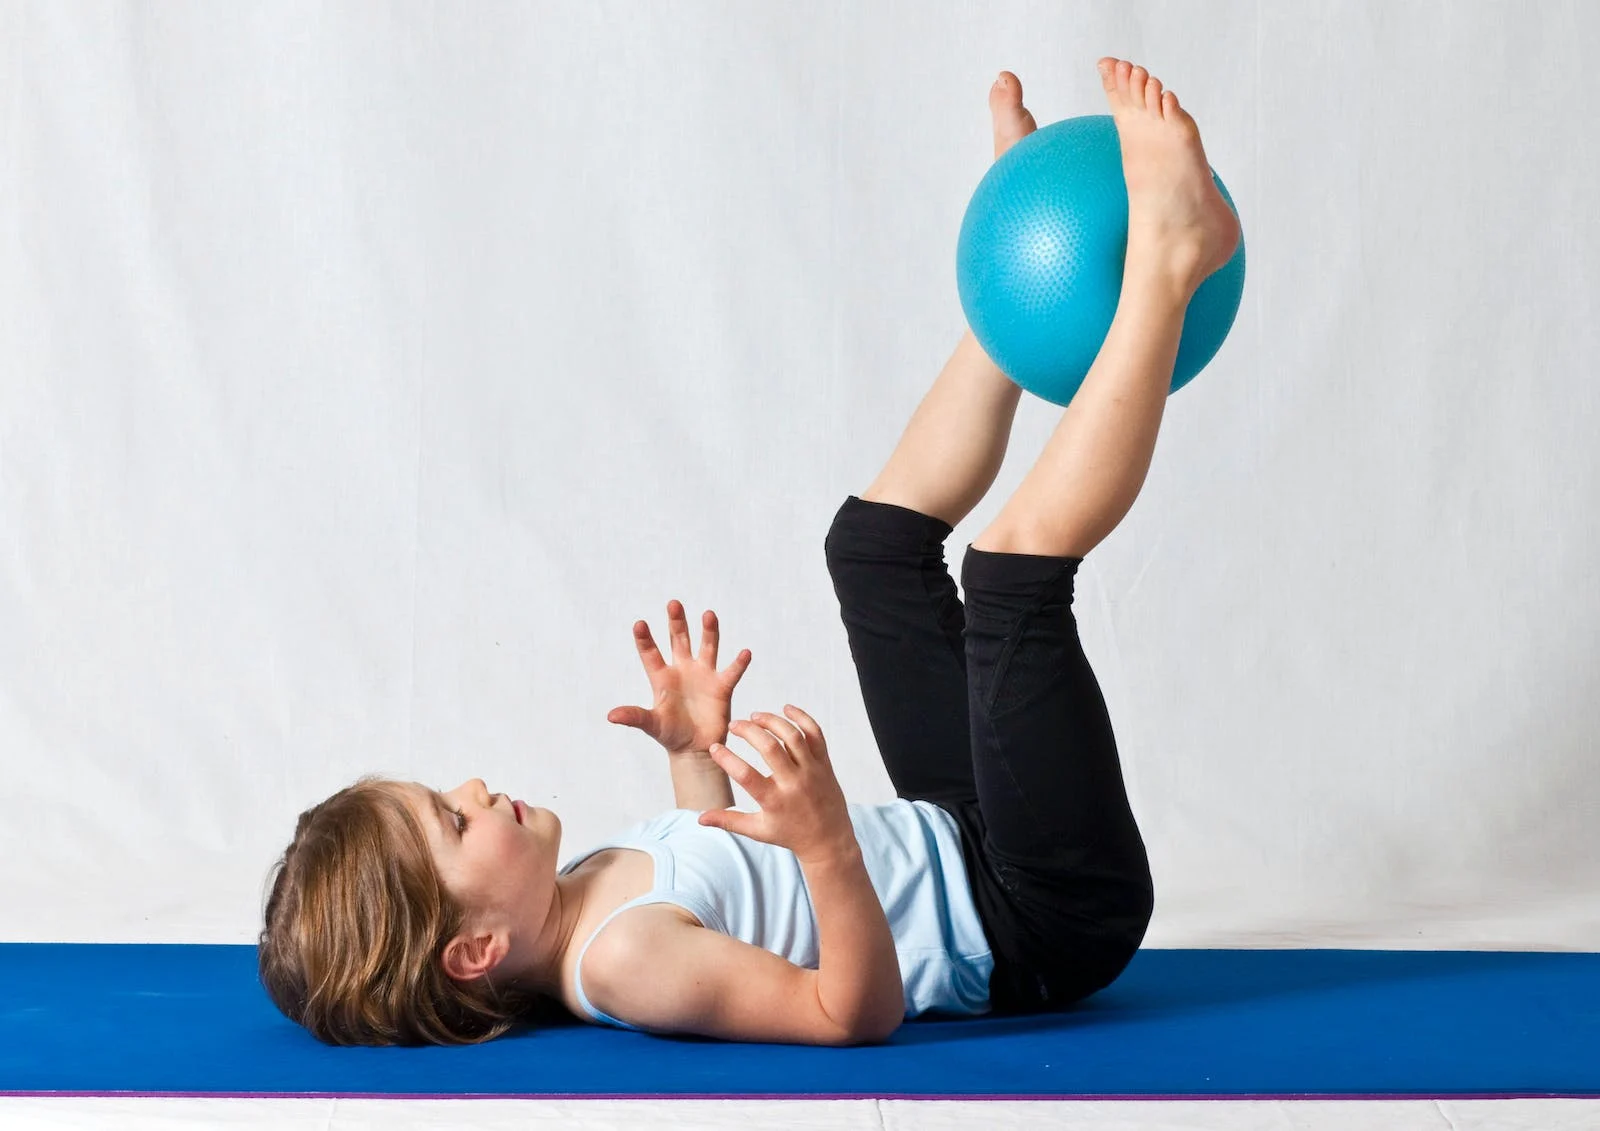 Young girl lying on her back with ball up in the air between her feet.